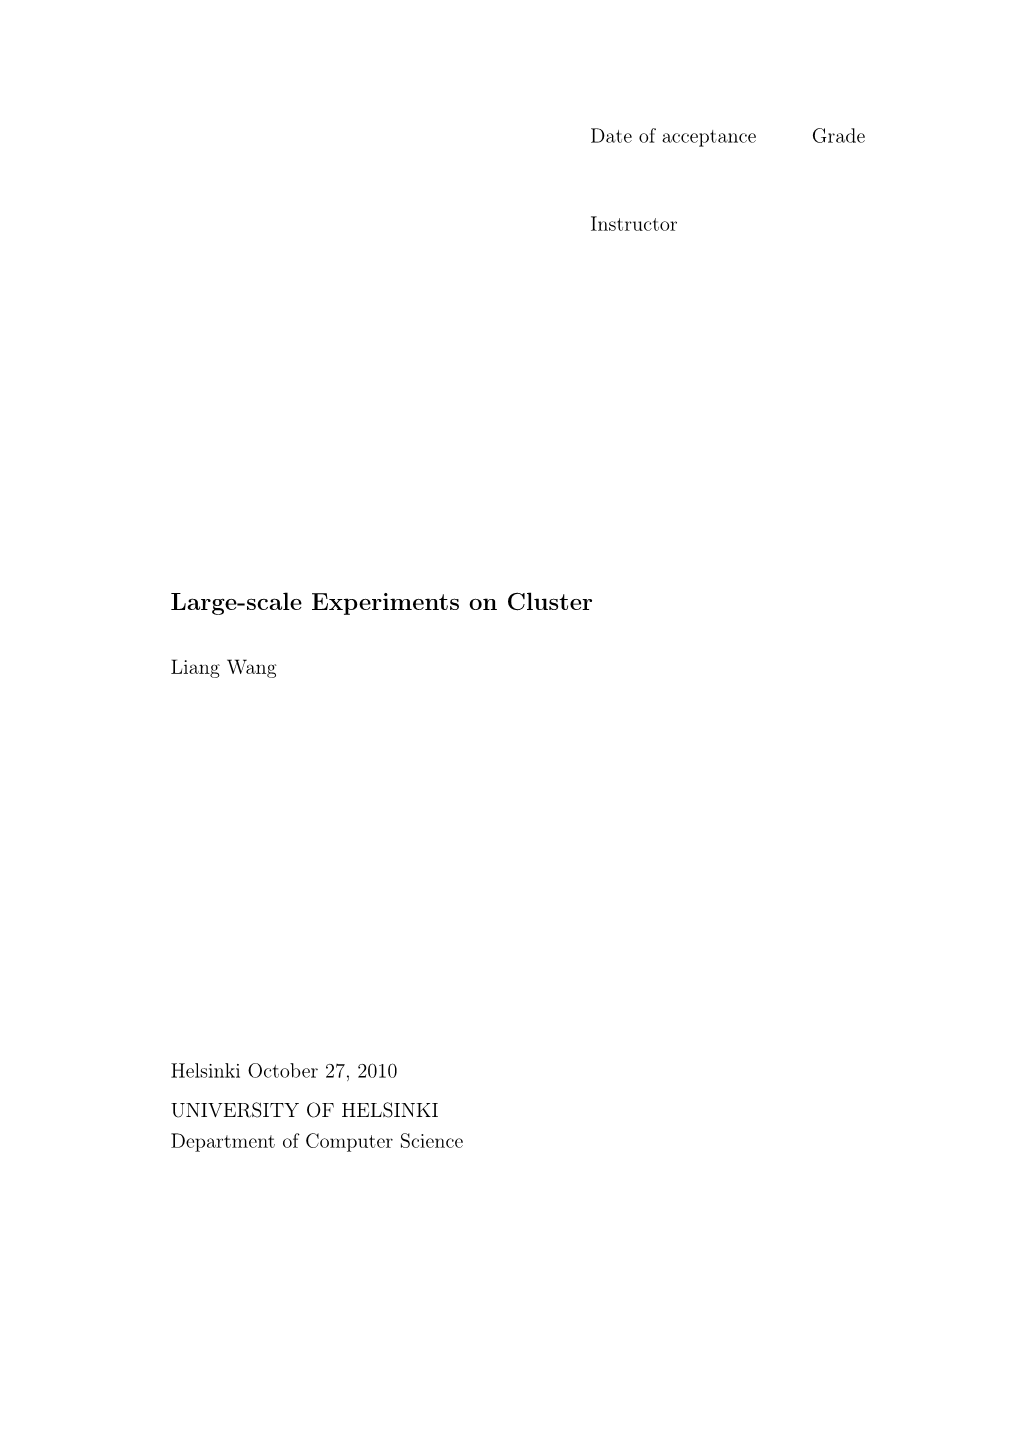 Large-Scale Experiments on Cluster